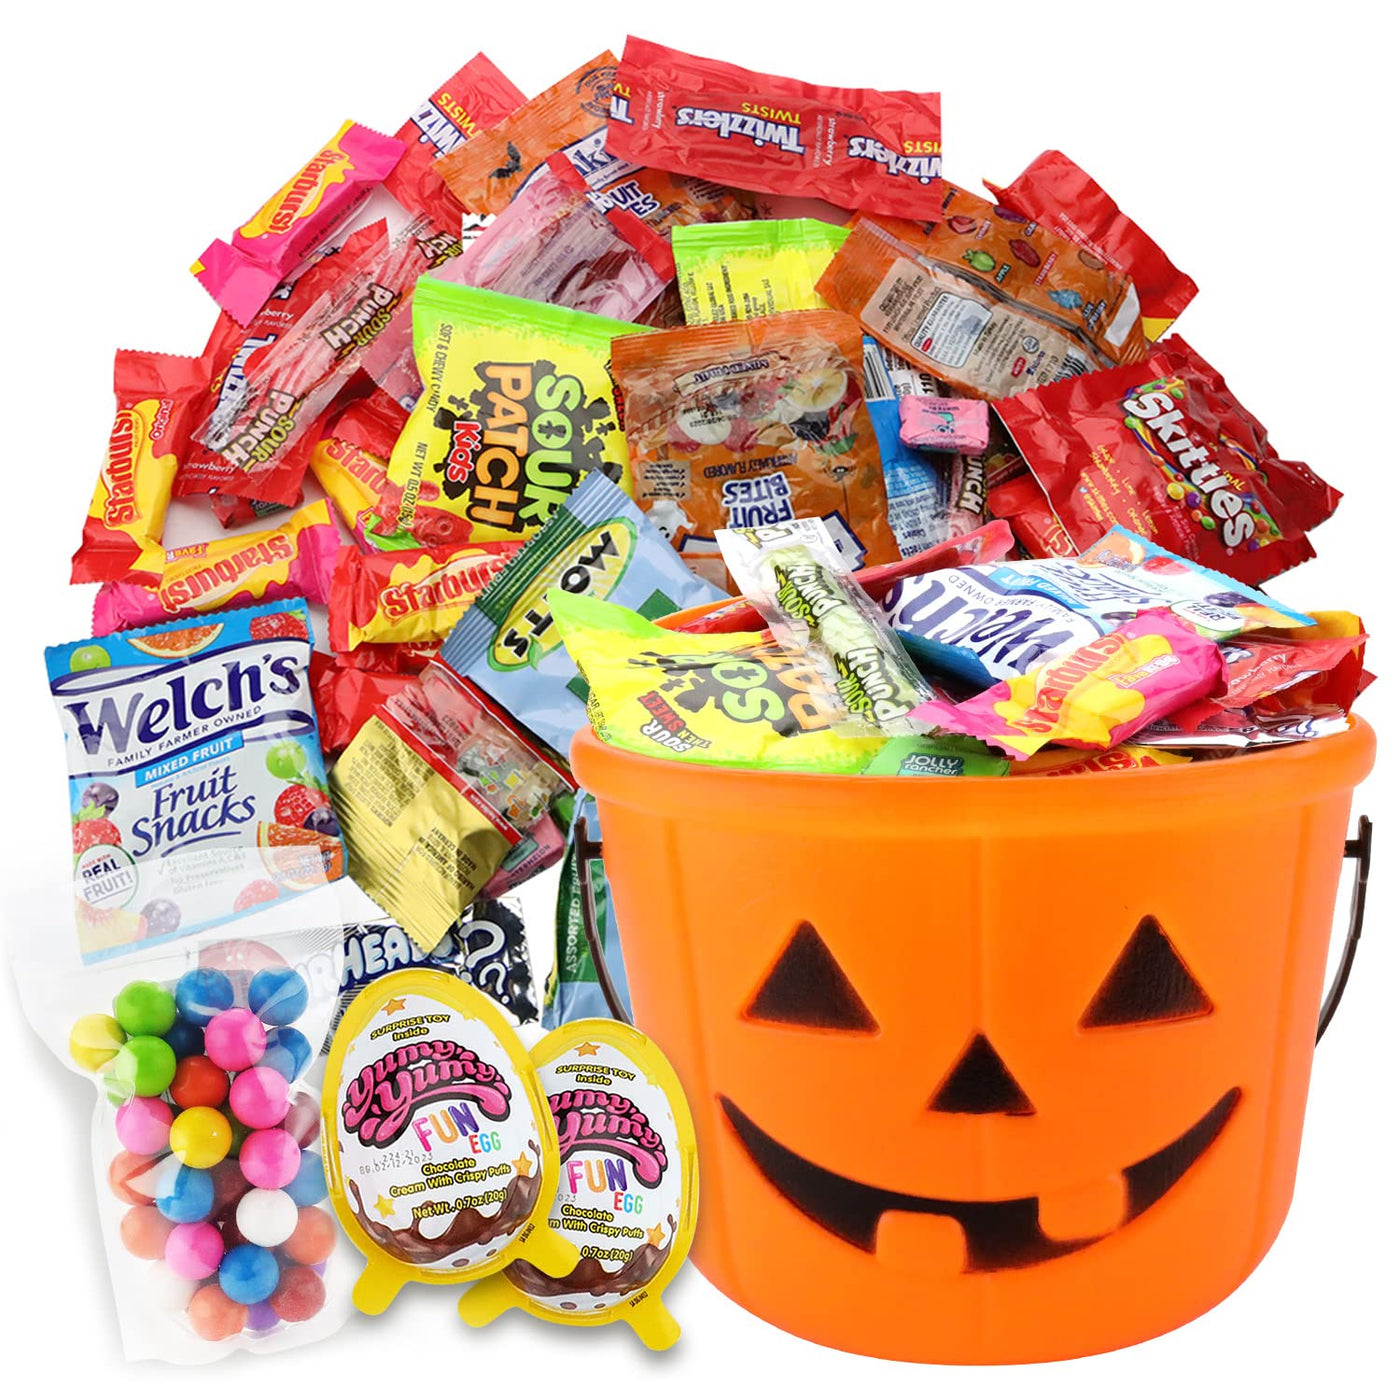 Halloween Care Package Gift Basket -2 Lbs Halloween Candy Treats, 55 items